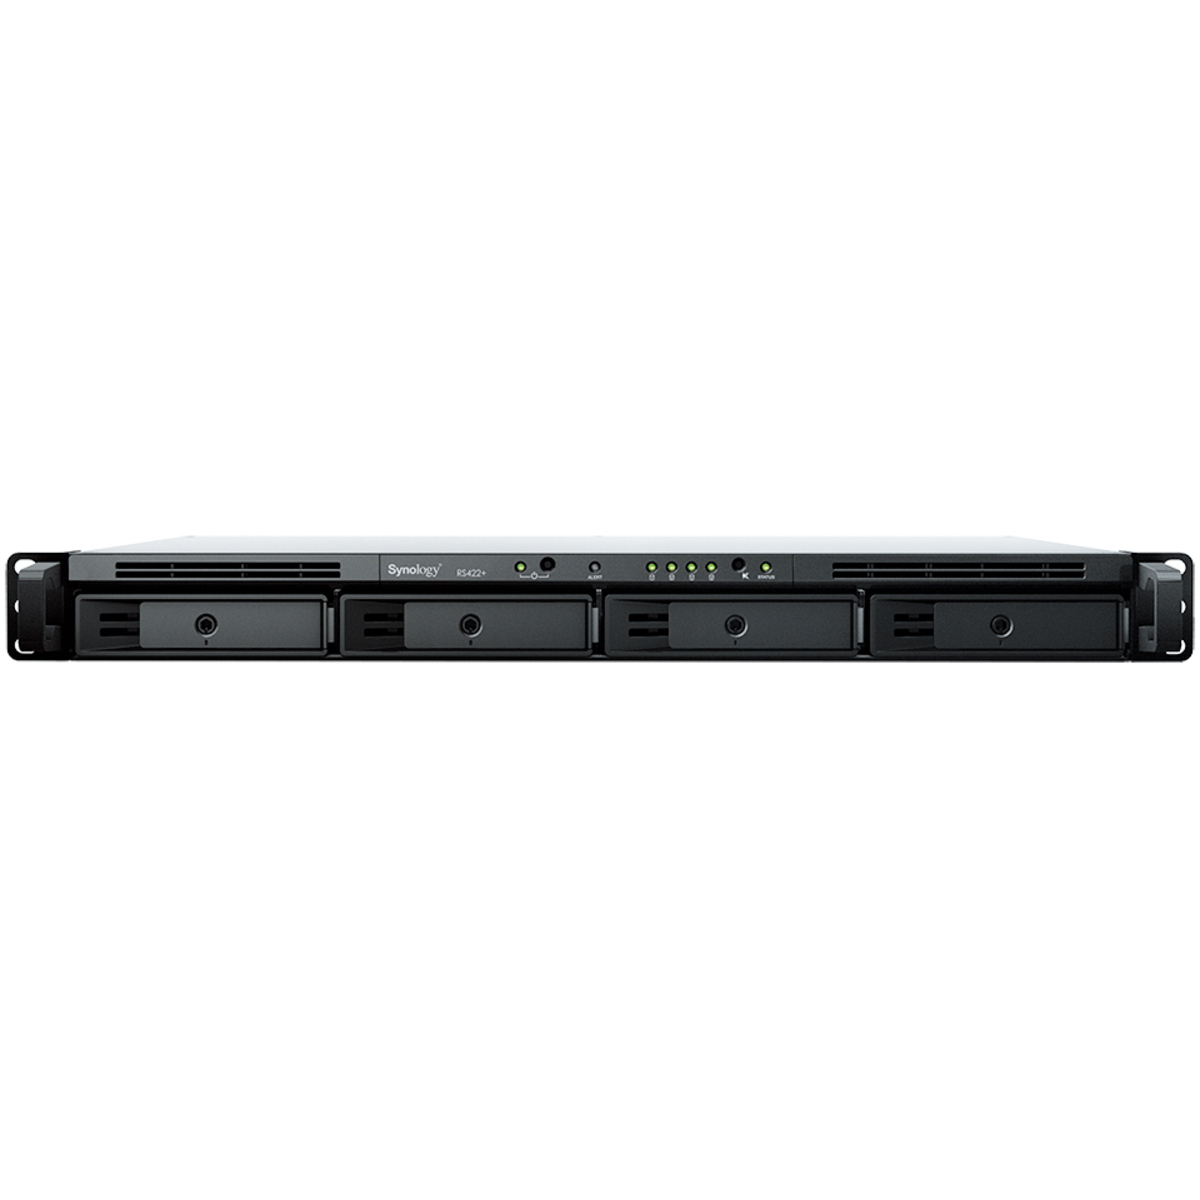 Synology RackStation RS422+ 8tb 4-Bay RackMount Personal / Basic Home / Small Office NAS - Network Attached Storage Device 4x2tb Sandisk Ultra 3D SDSSDH3-2T00 2.5 560/520MB/s SATA 6Gb/s SSD CONSUMER Class Drives Installed - Burn-In Tested RackStation RS422+